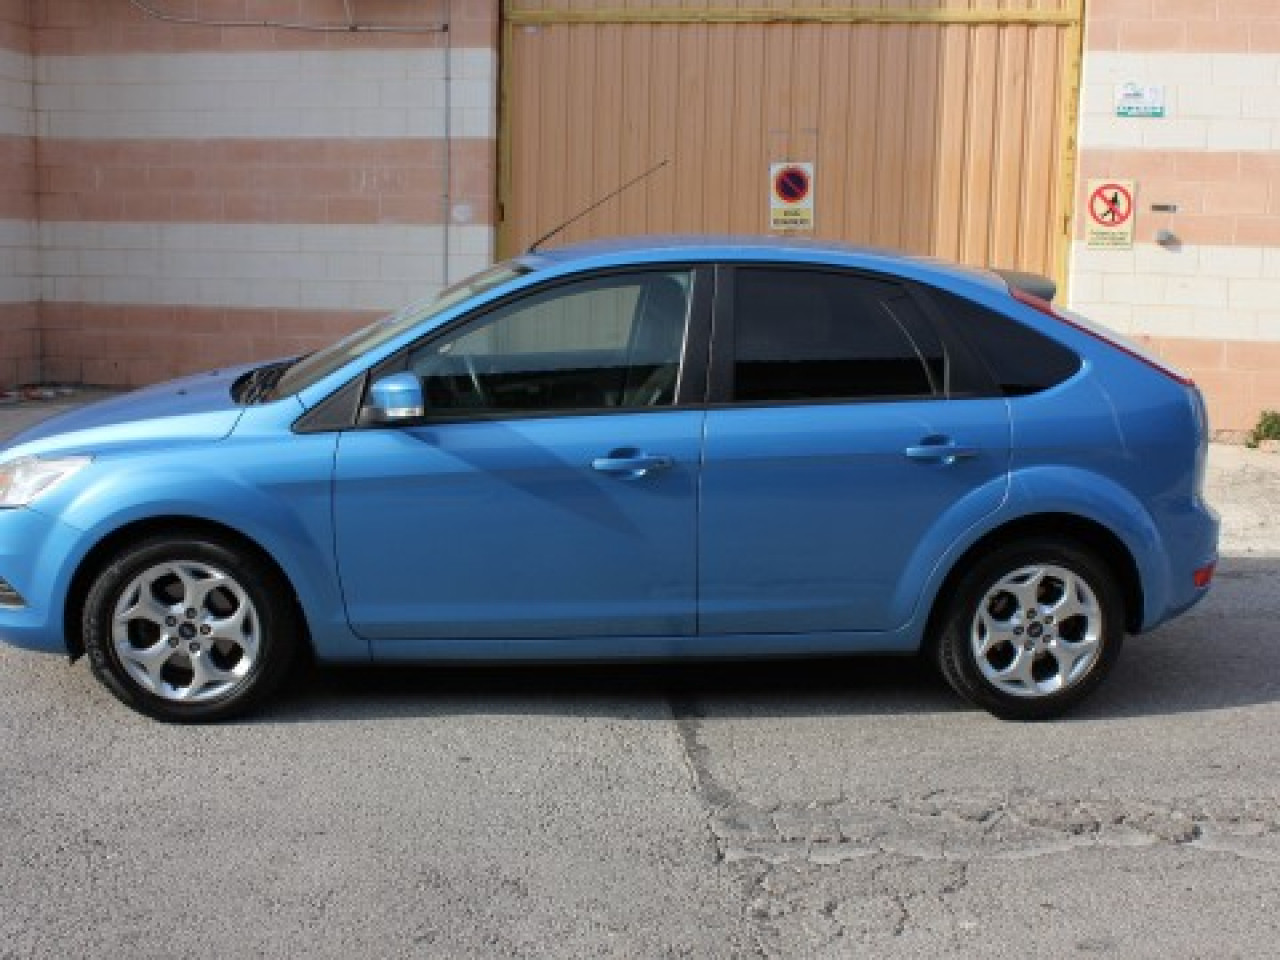 Ford Focus 1.6 Tdci Kinetic Photo